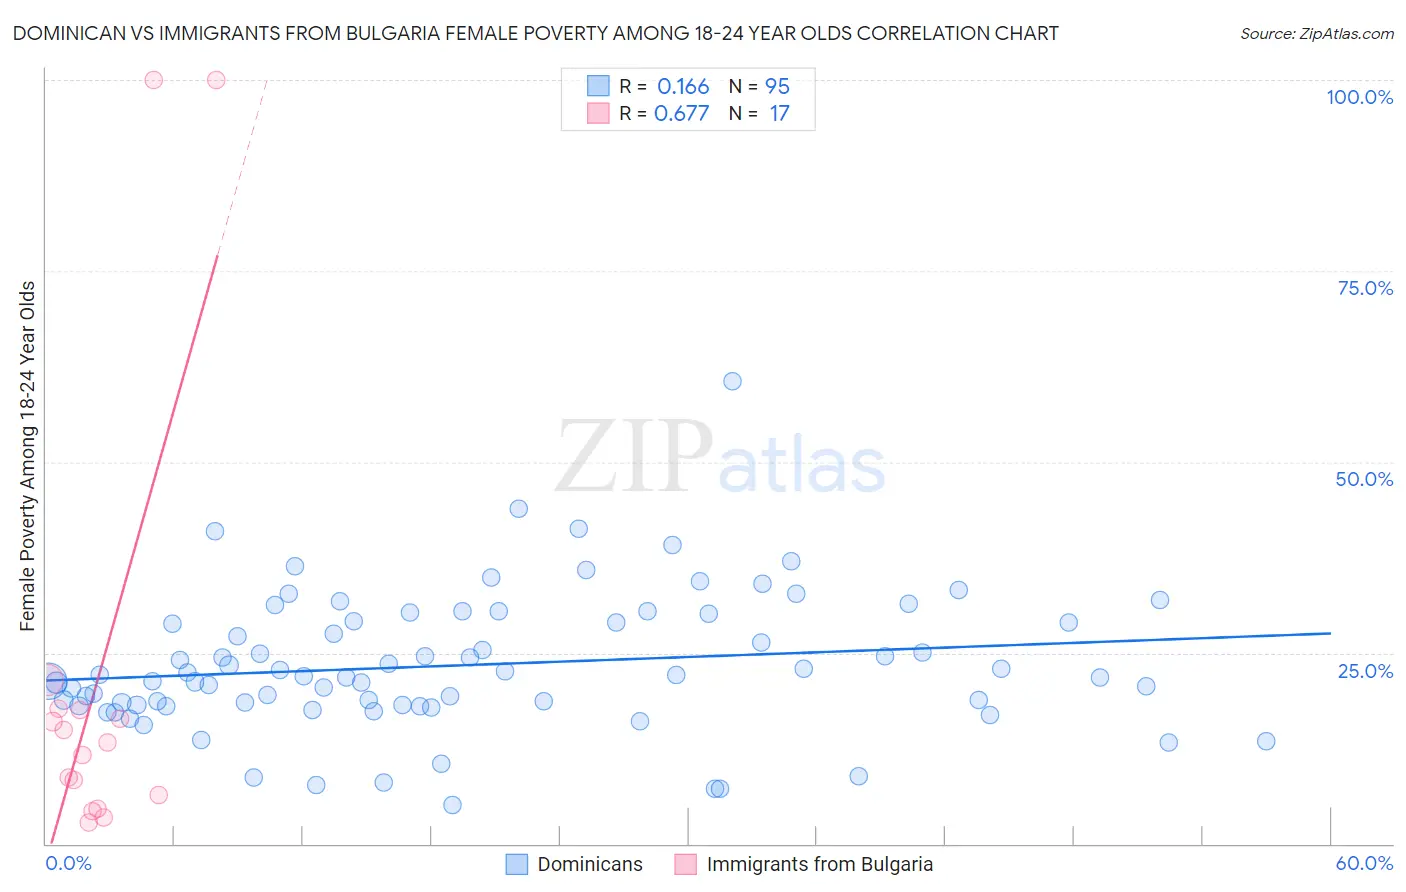 Dominican vs Immigrants from Bulgaria Female Poverty Among 18-24 Year Olds